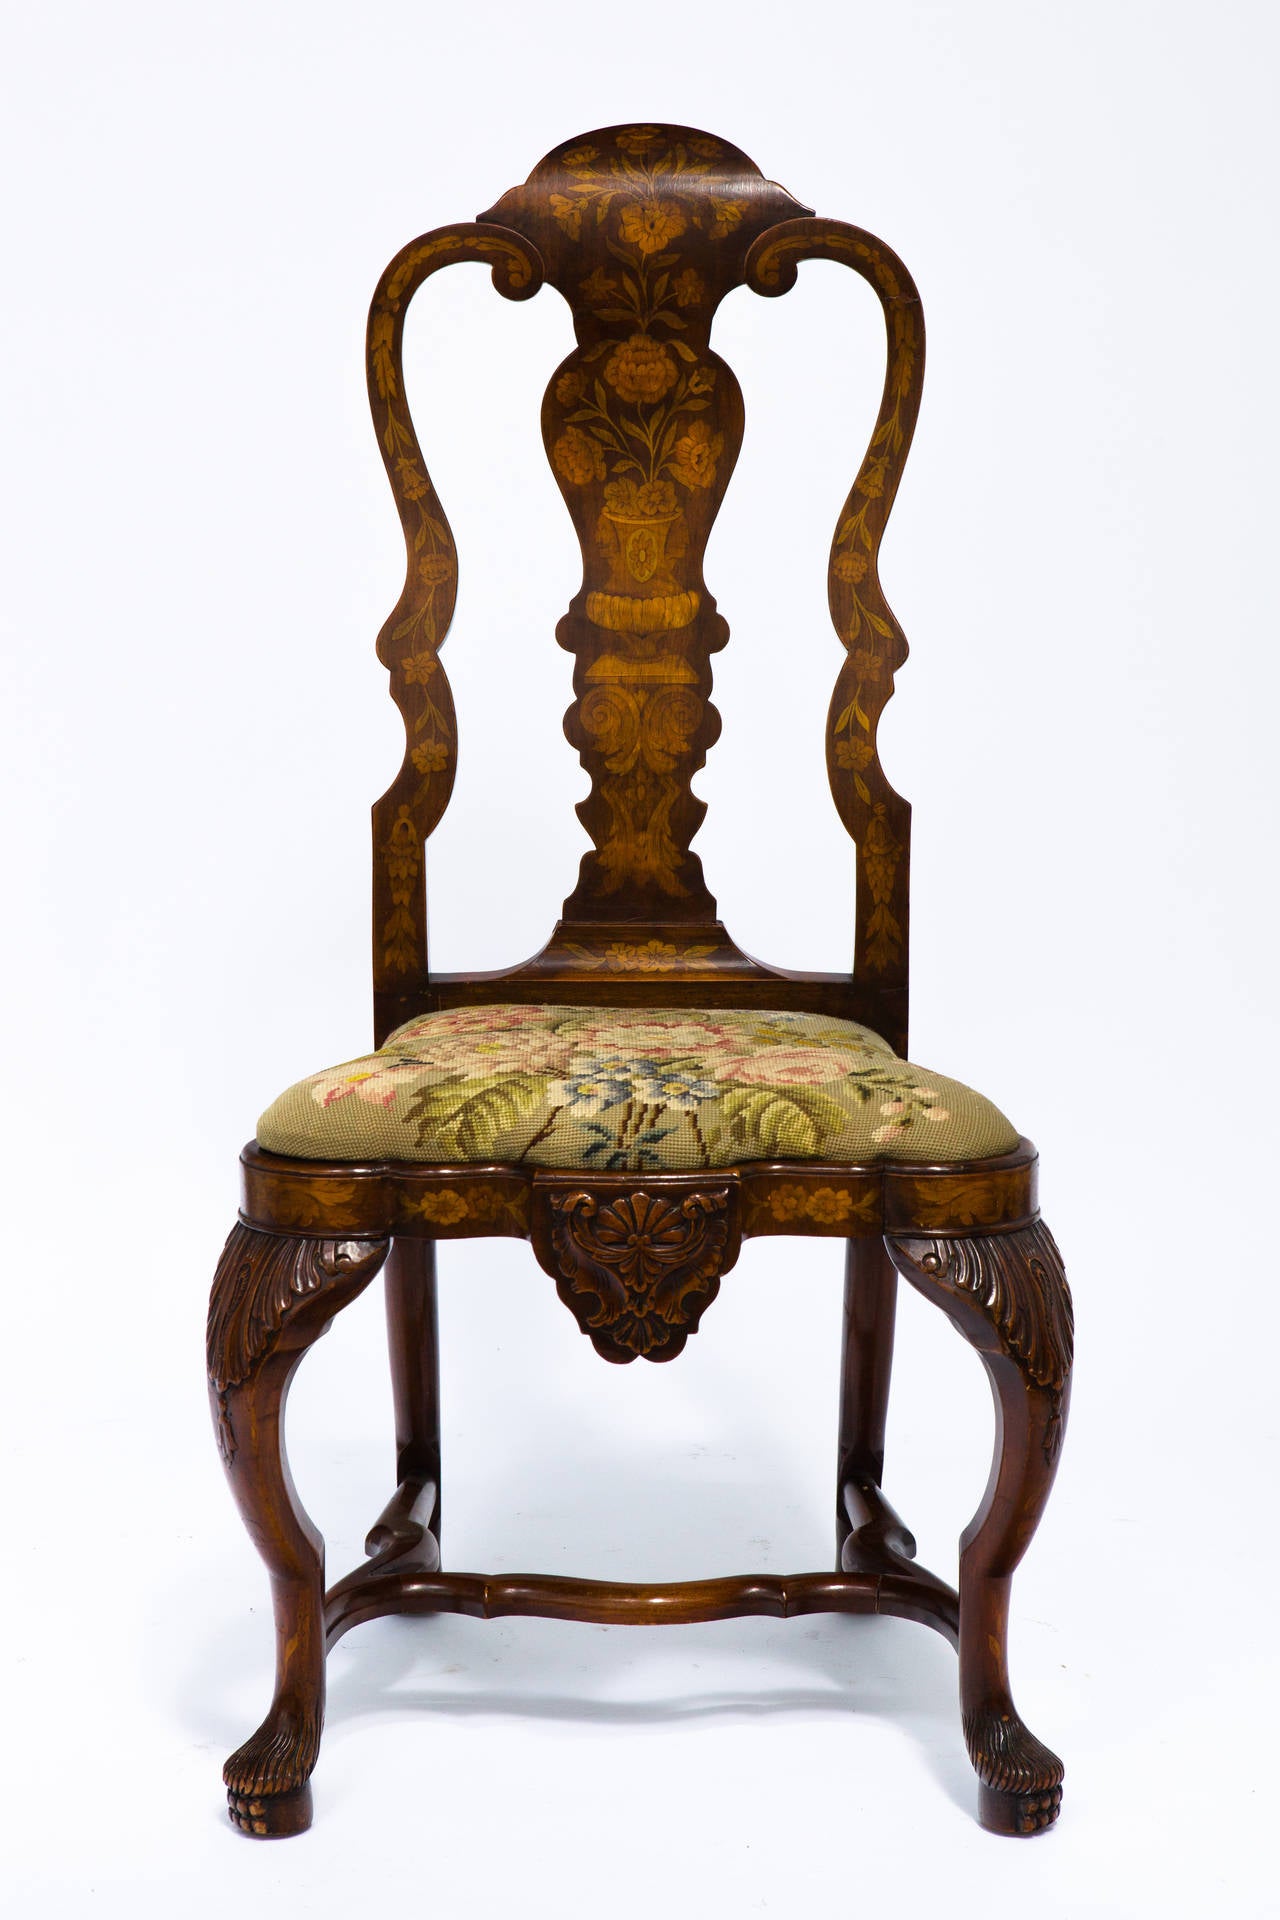 1920s Dutch marquetry side chair with needlepoint seat.